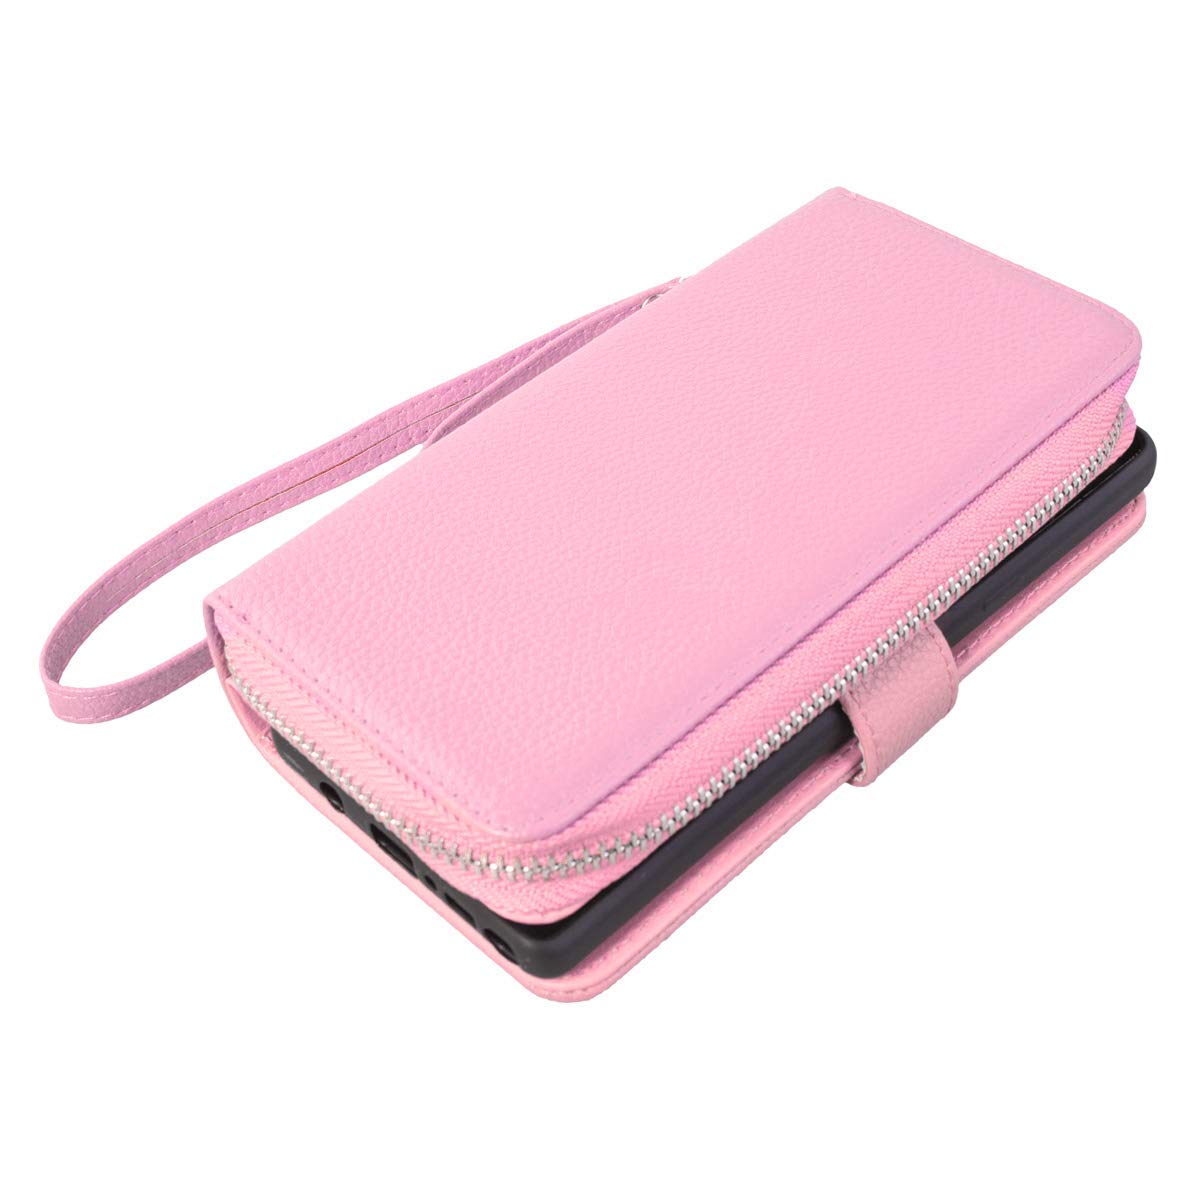 Galaxy Note 9 Case 2018, Mignova 2-in-1 Zipper Wallet Case for Samsung Galaxy note 9 PU Case Removable - Leather Flap Wallet Case Cover for Samsung Galaxy note 9(Light Pink) - image 3 of 8